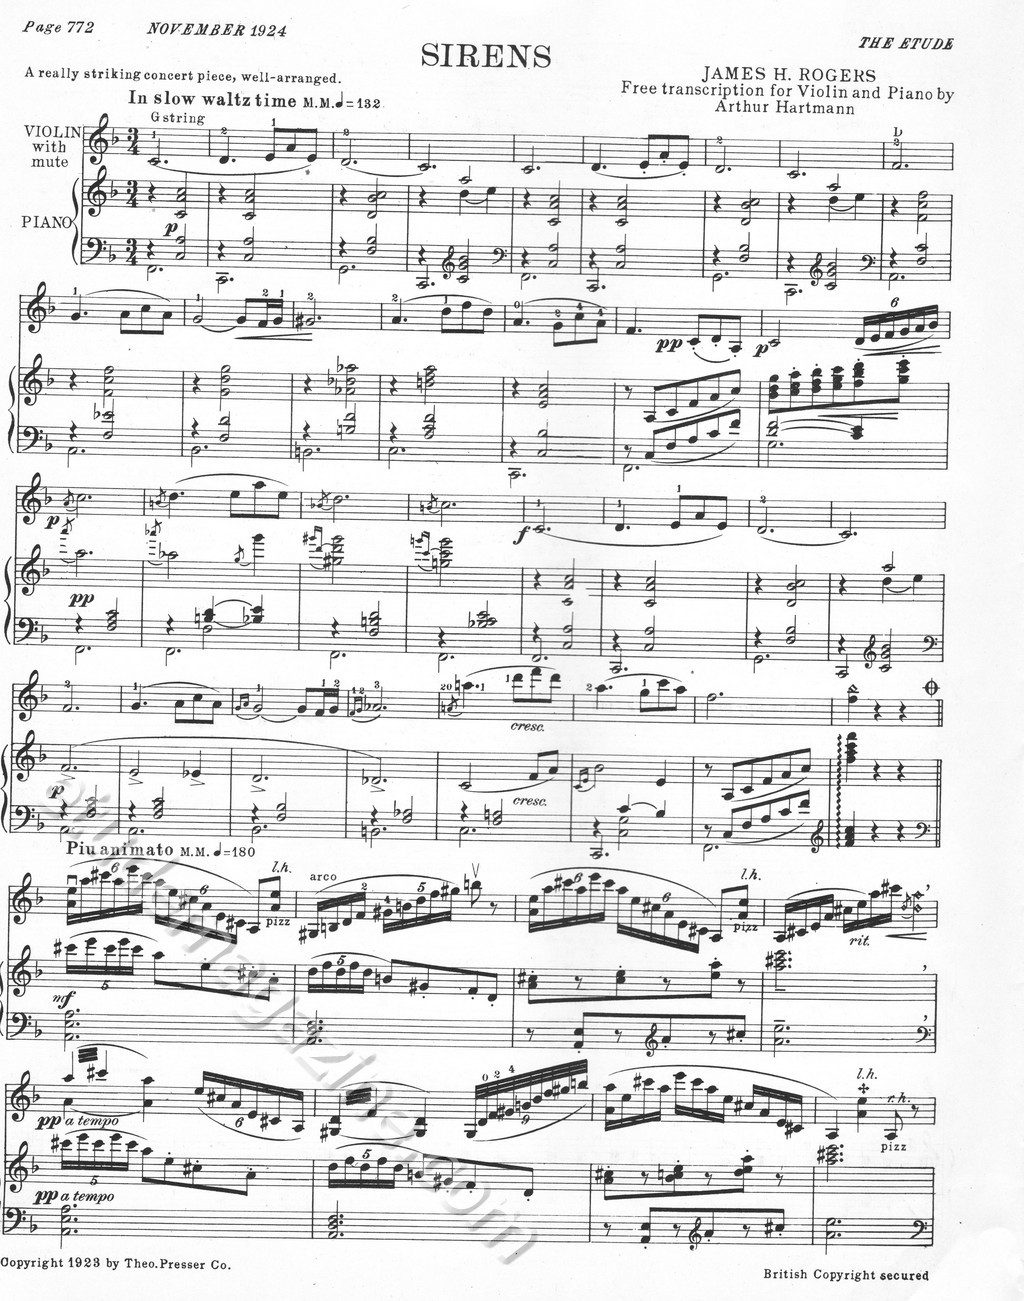 Sirens. James H. Rogers (Free transcription for Violin and Piano by Arthur Hartmann)